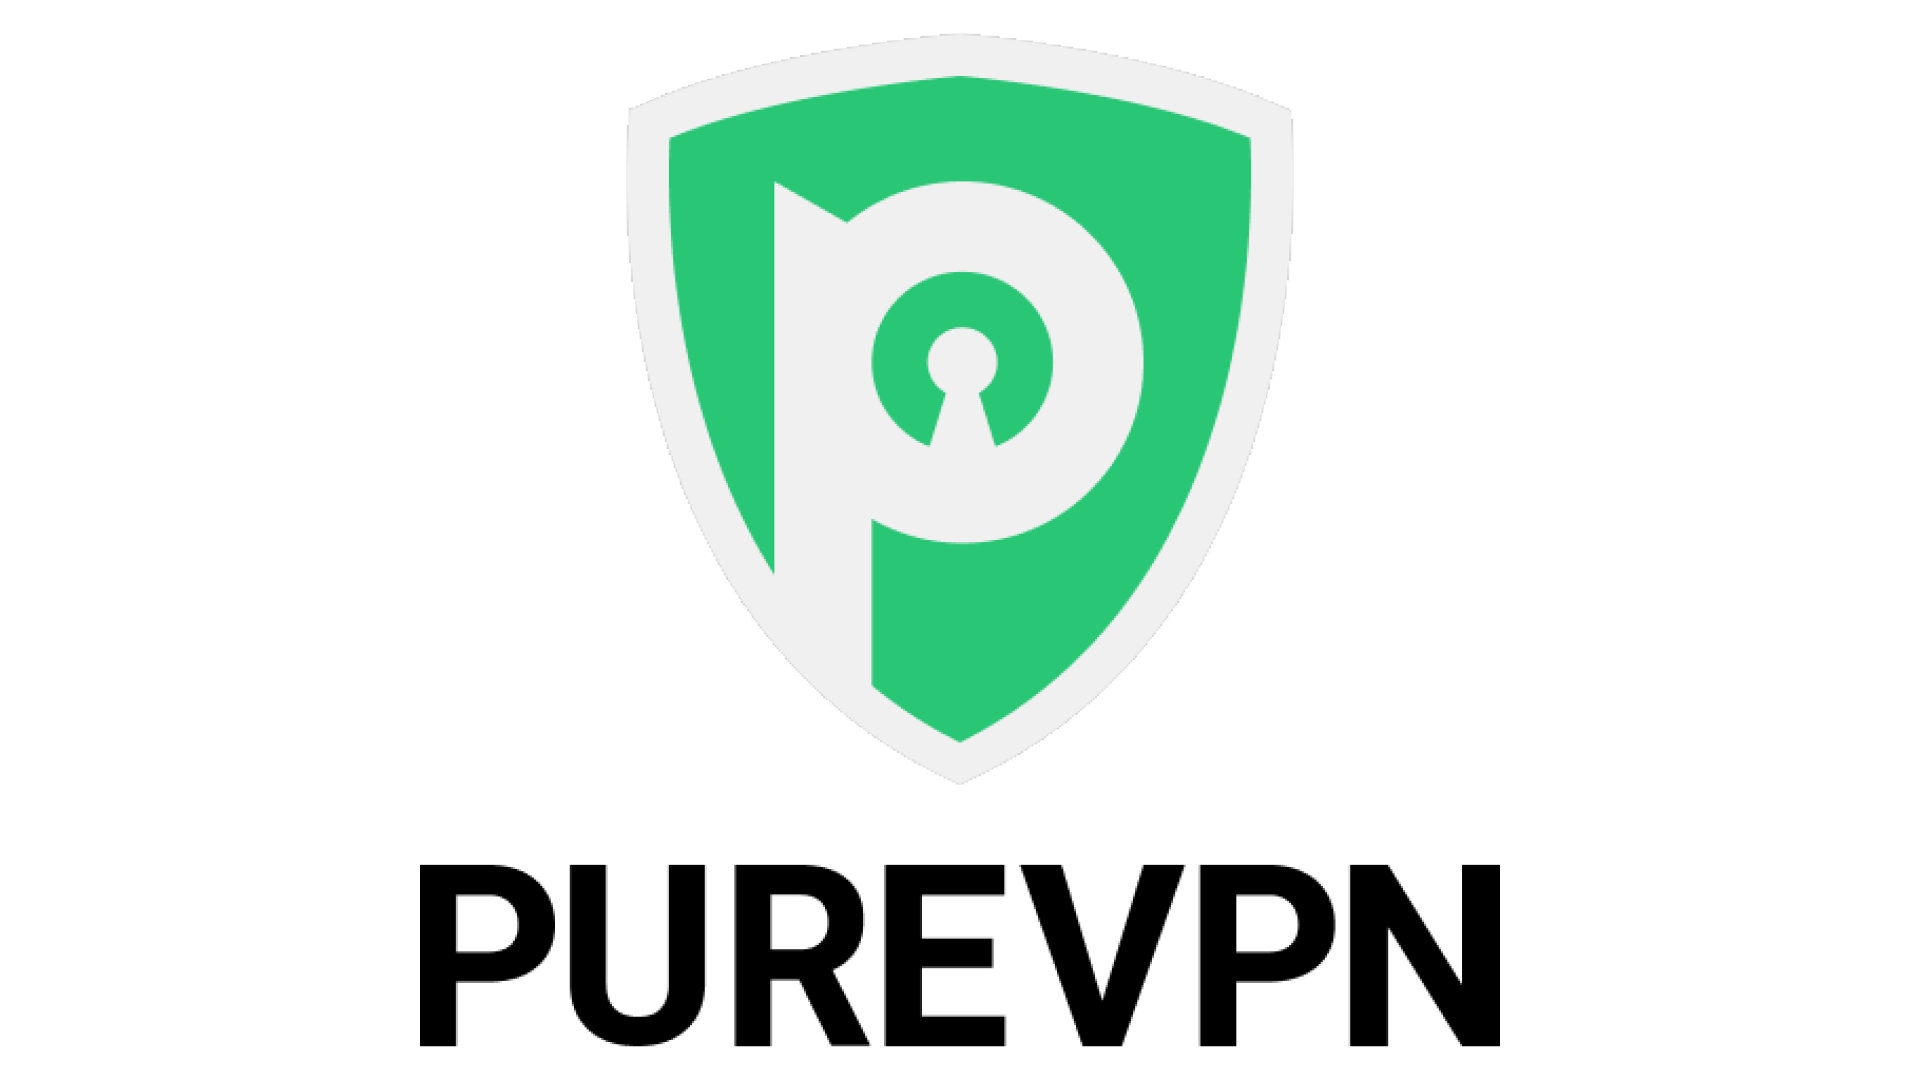 Fastest VPN, PureVPN. Its logo is on a white background.